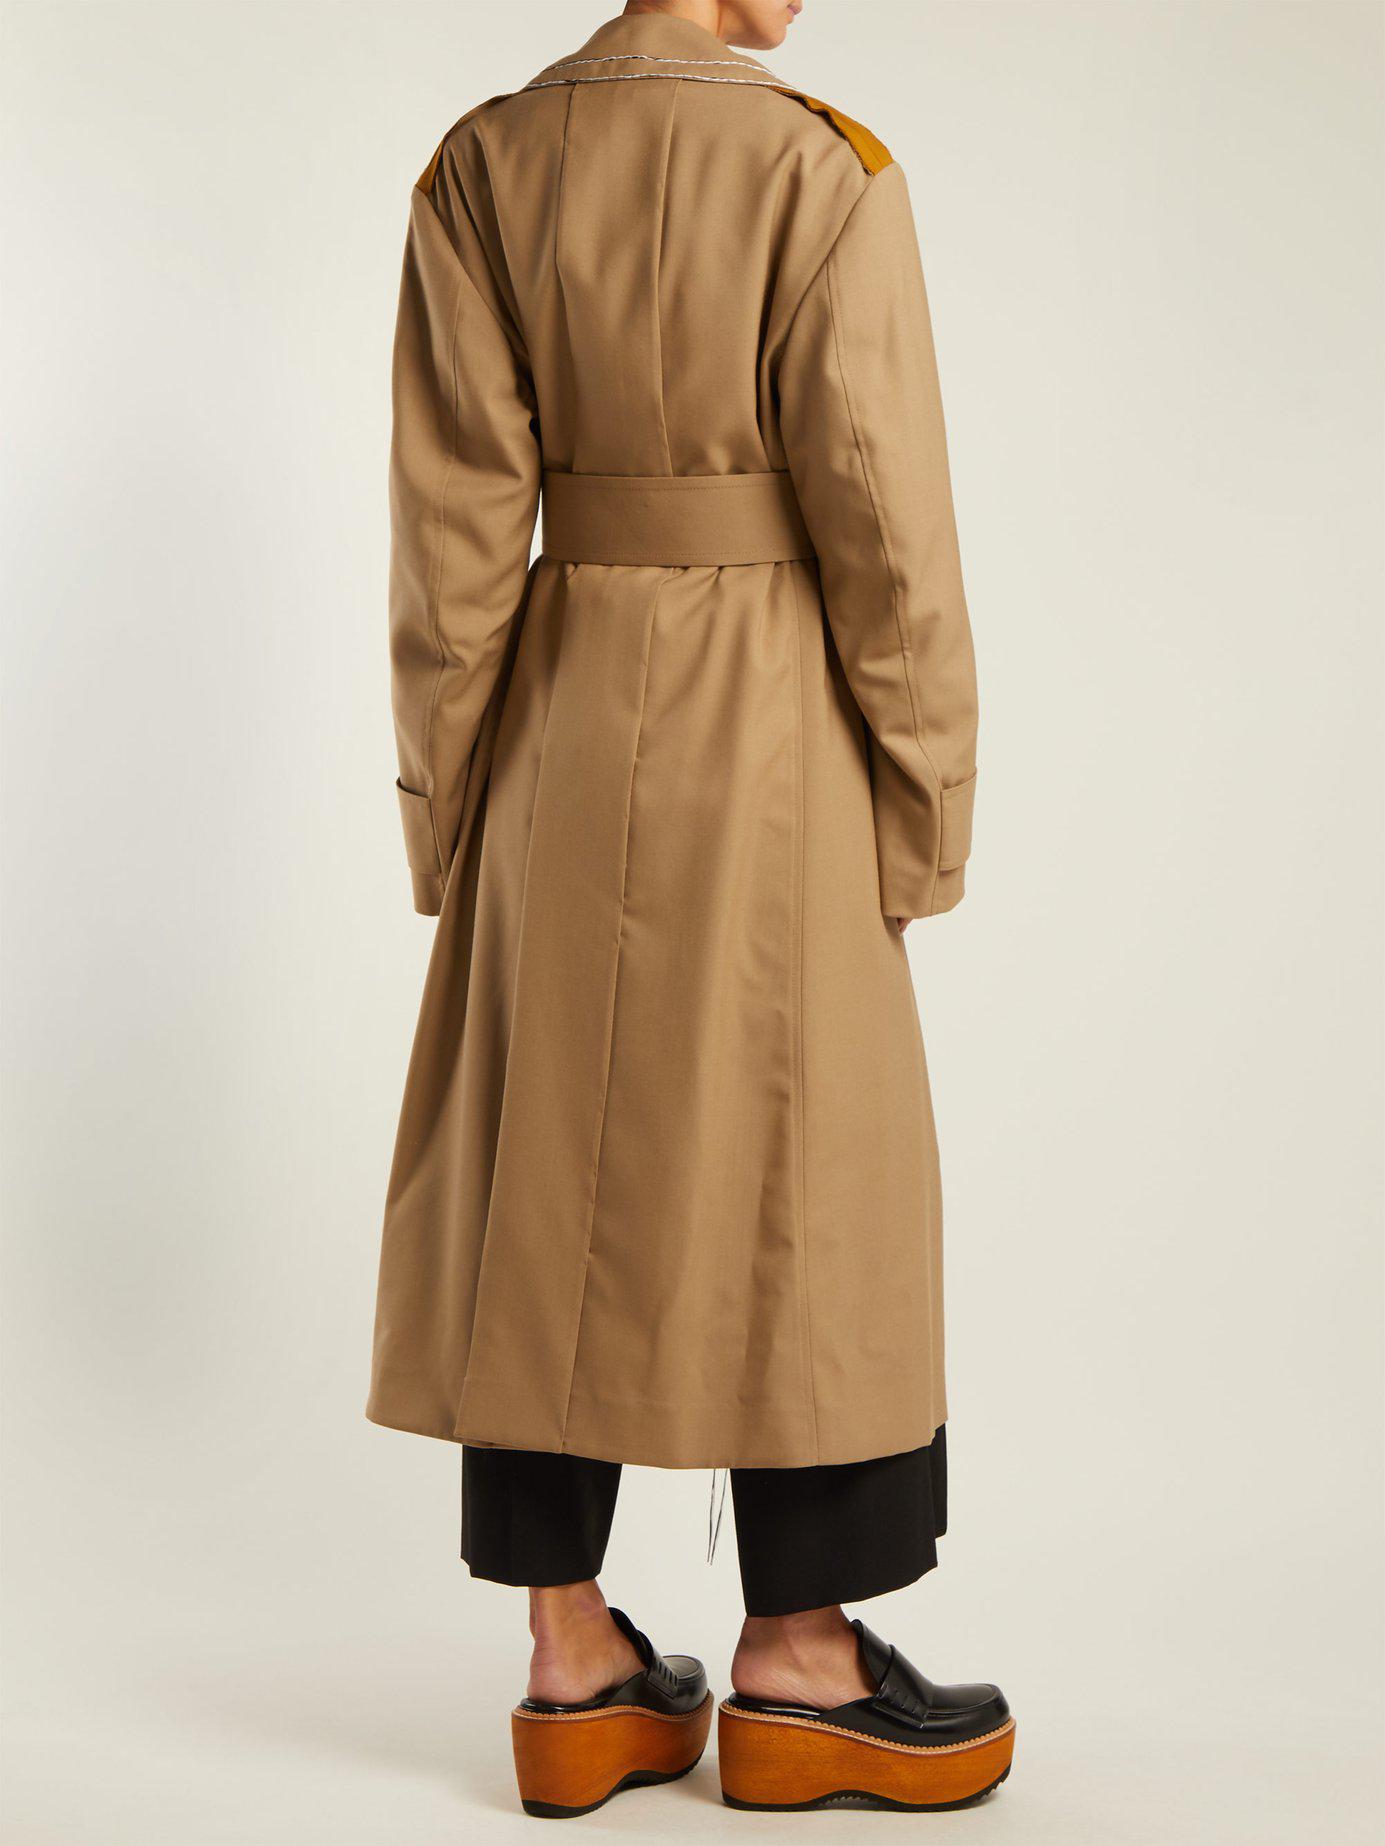 Marni Belted Wool Trench Coat in Natural - Lyst